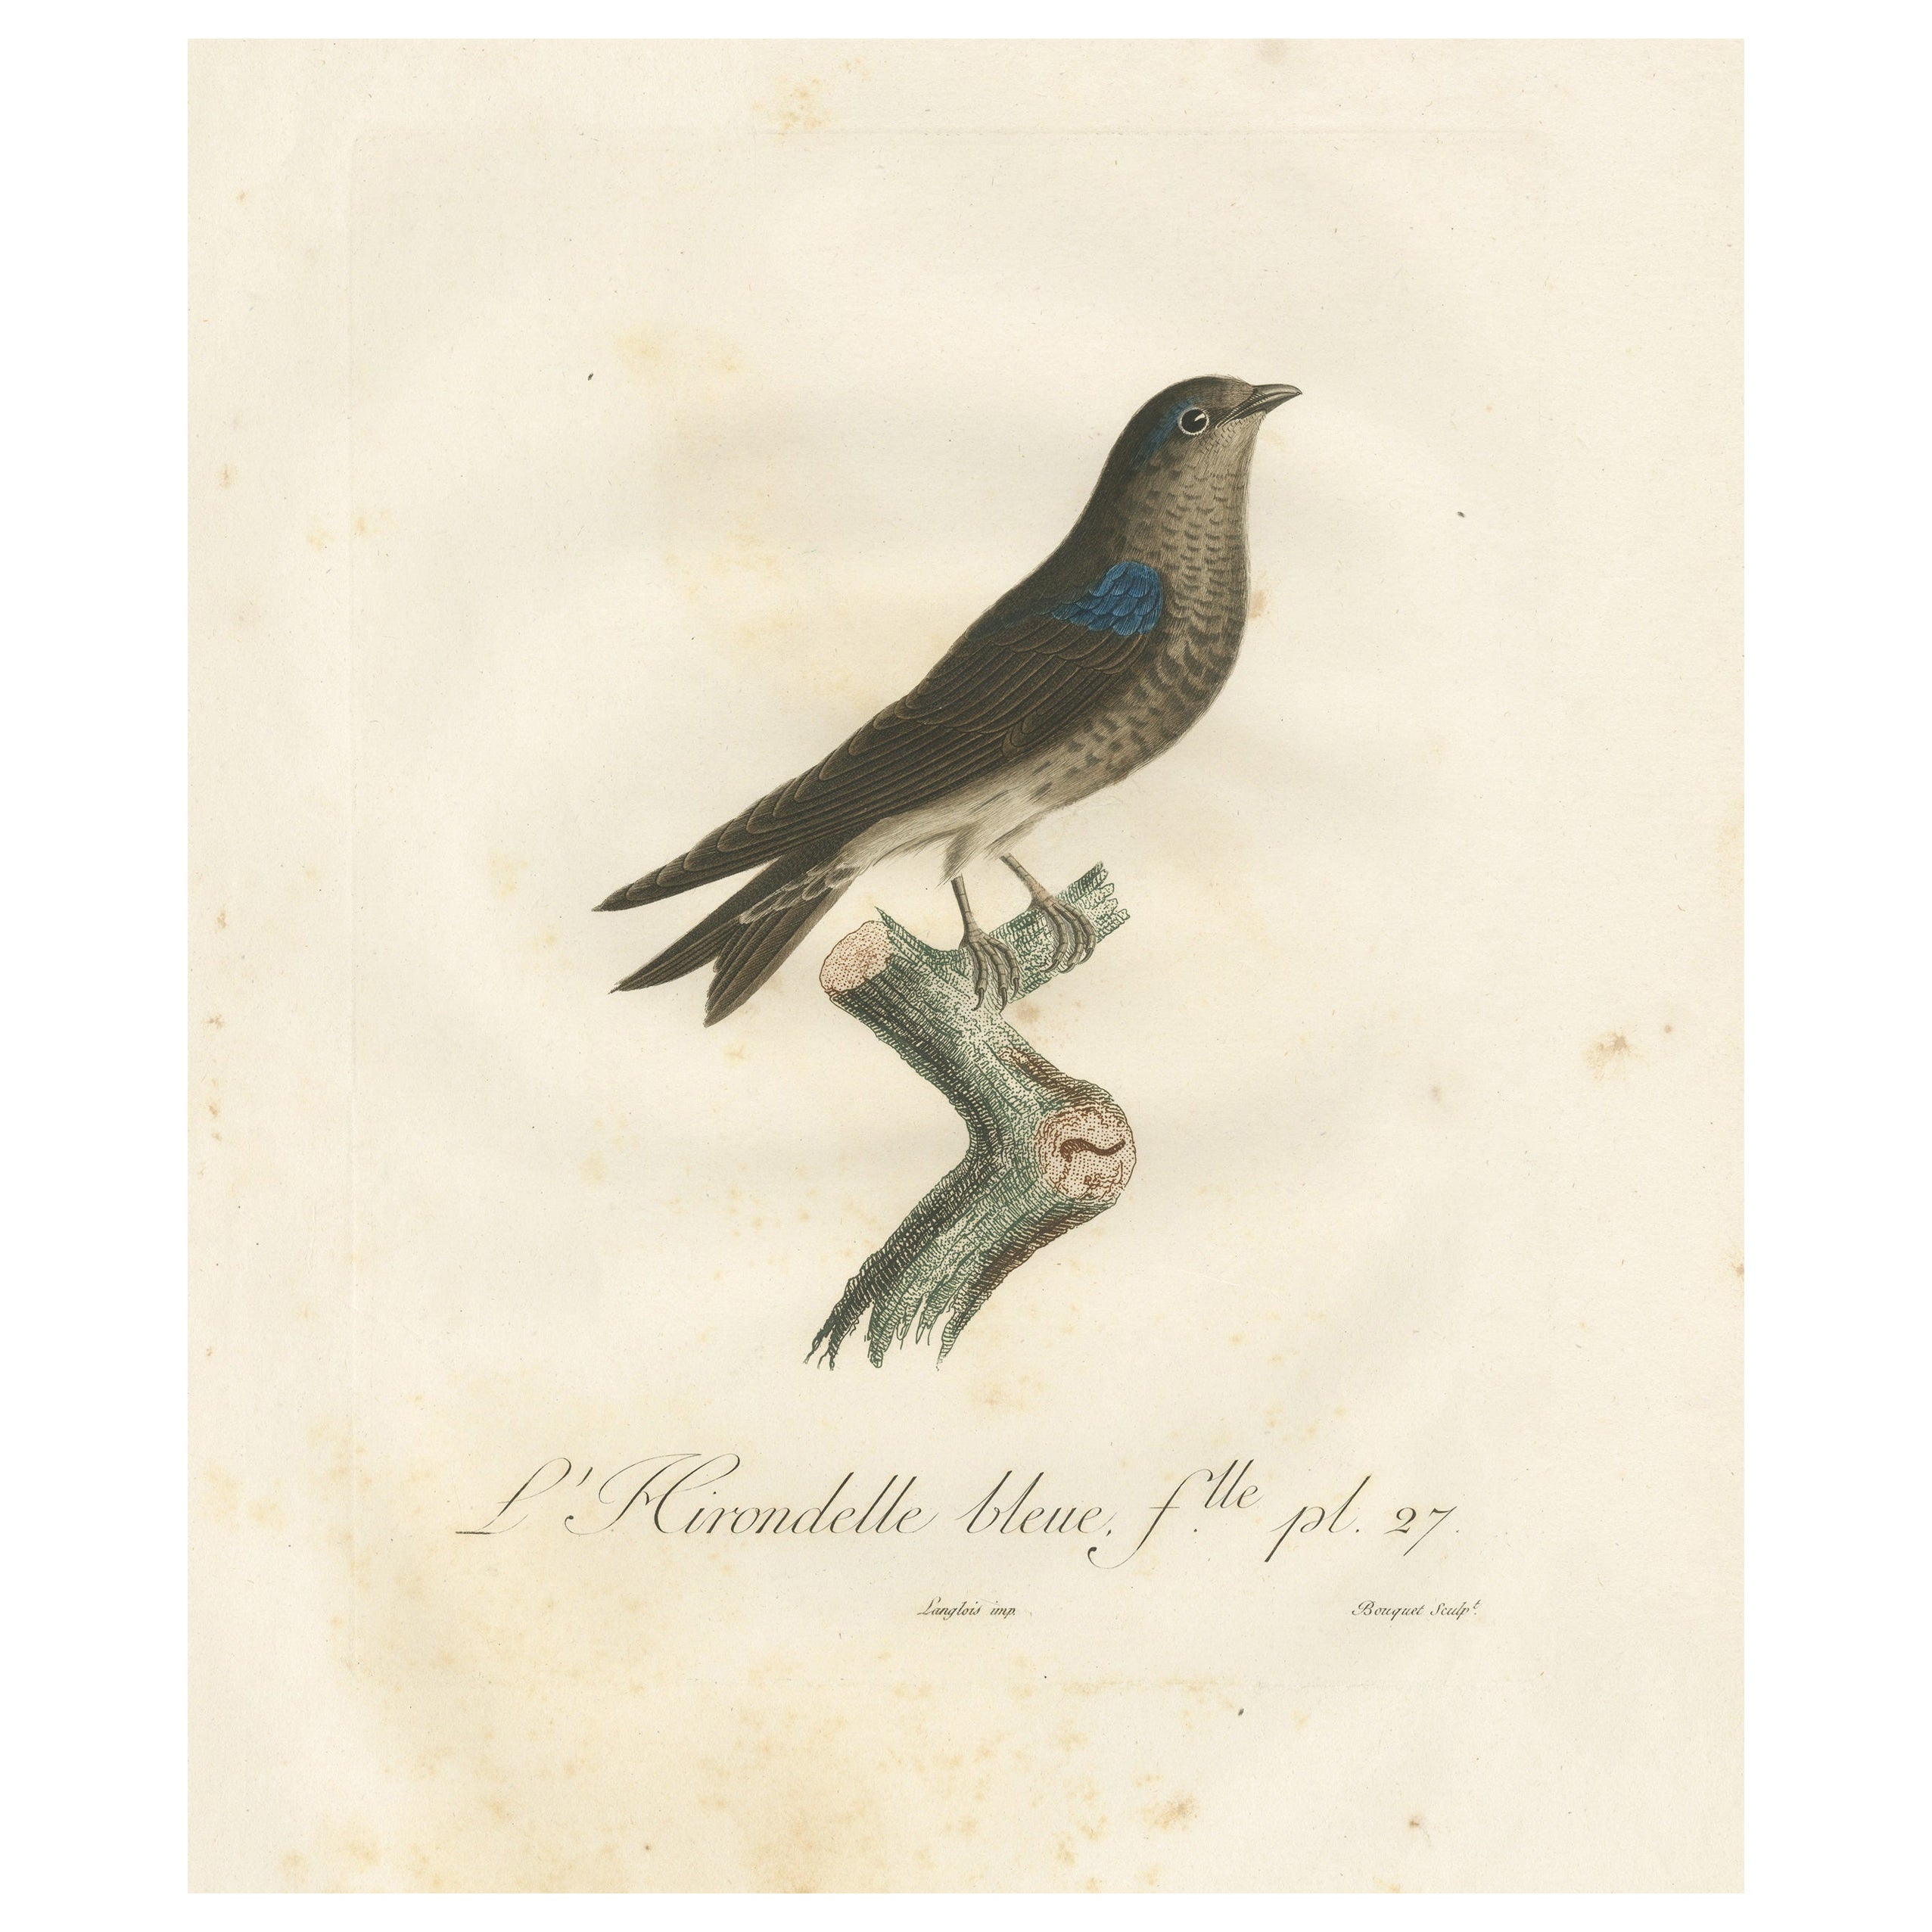 Feathered Sapphire: The Blue Swallow – A Vieillot Hand-Colored Print from 1807 For Sale